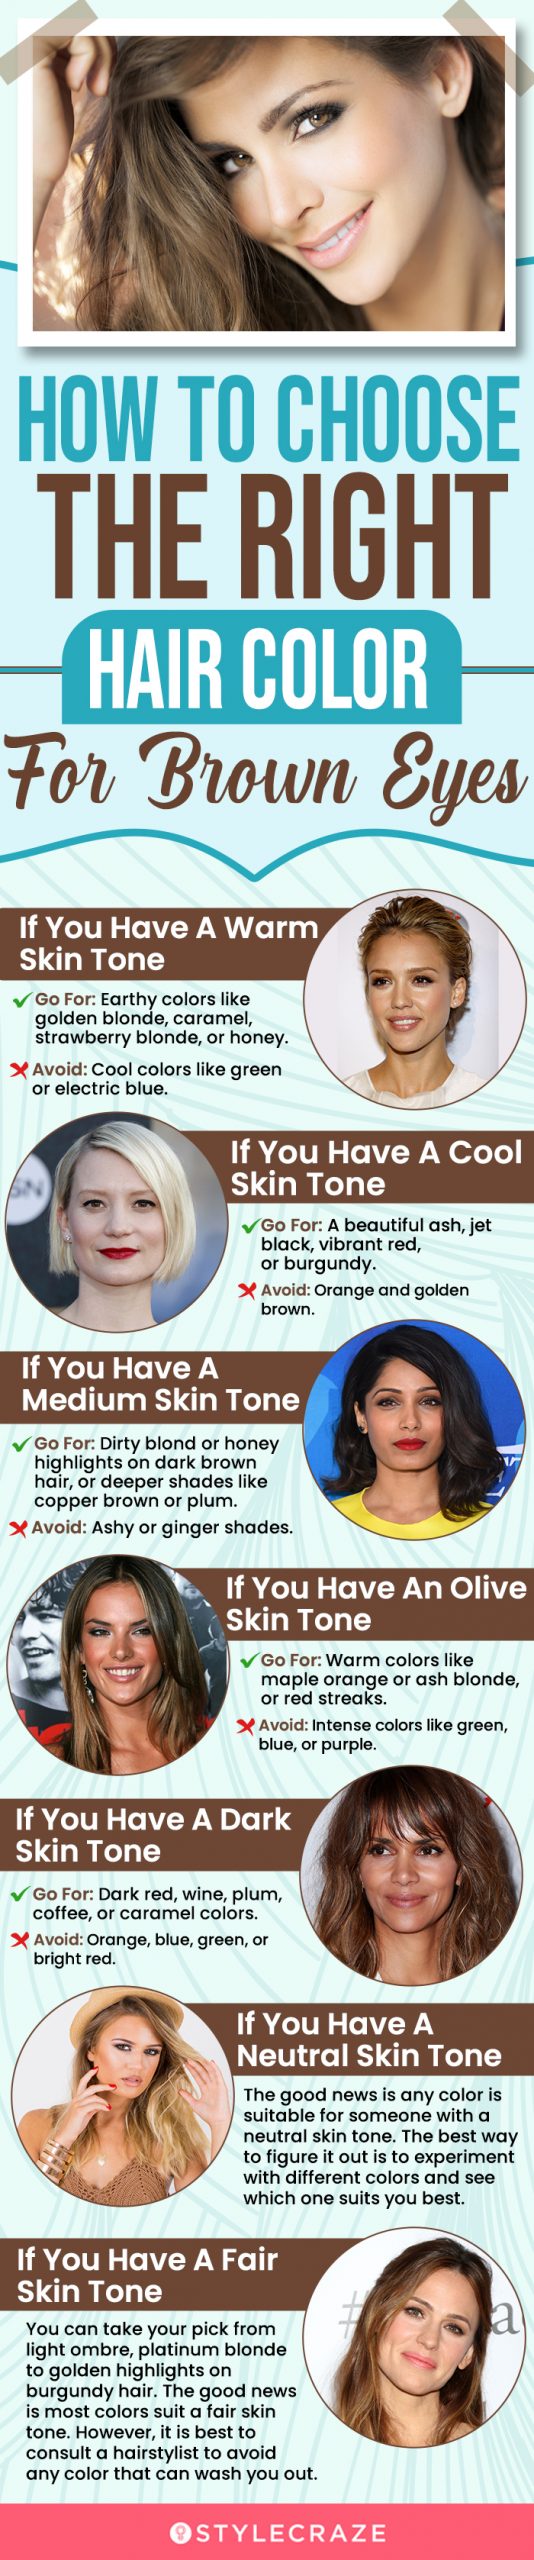 how to choose the right hair colour for brown eye [infographic]